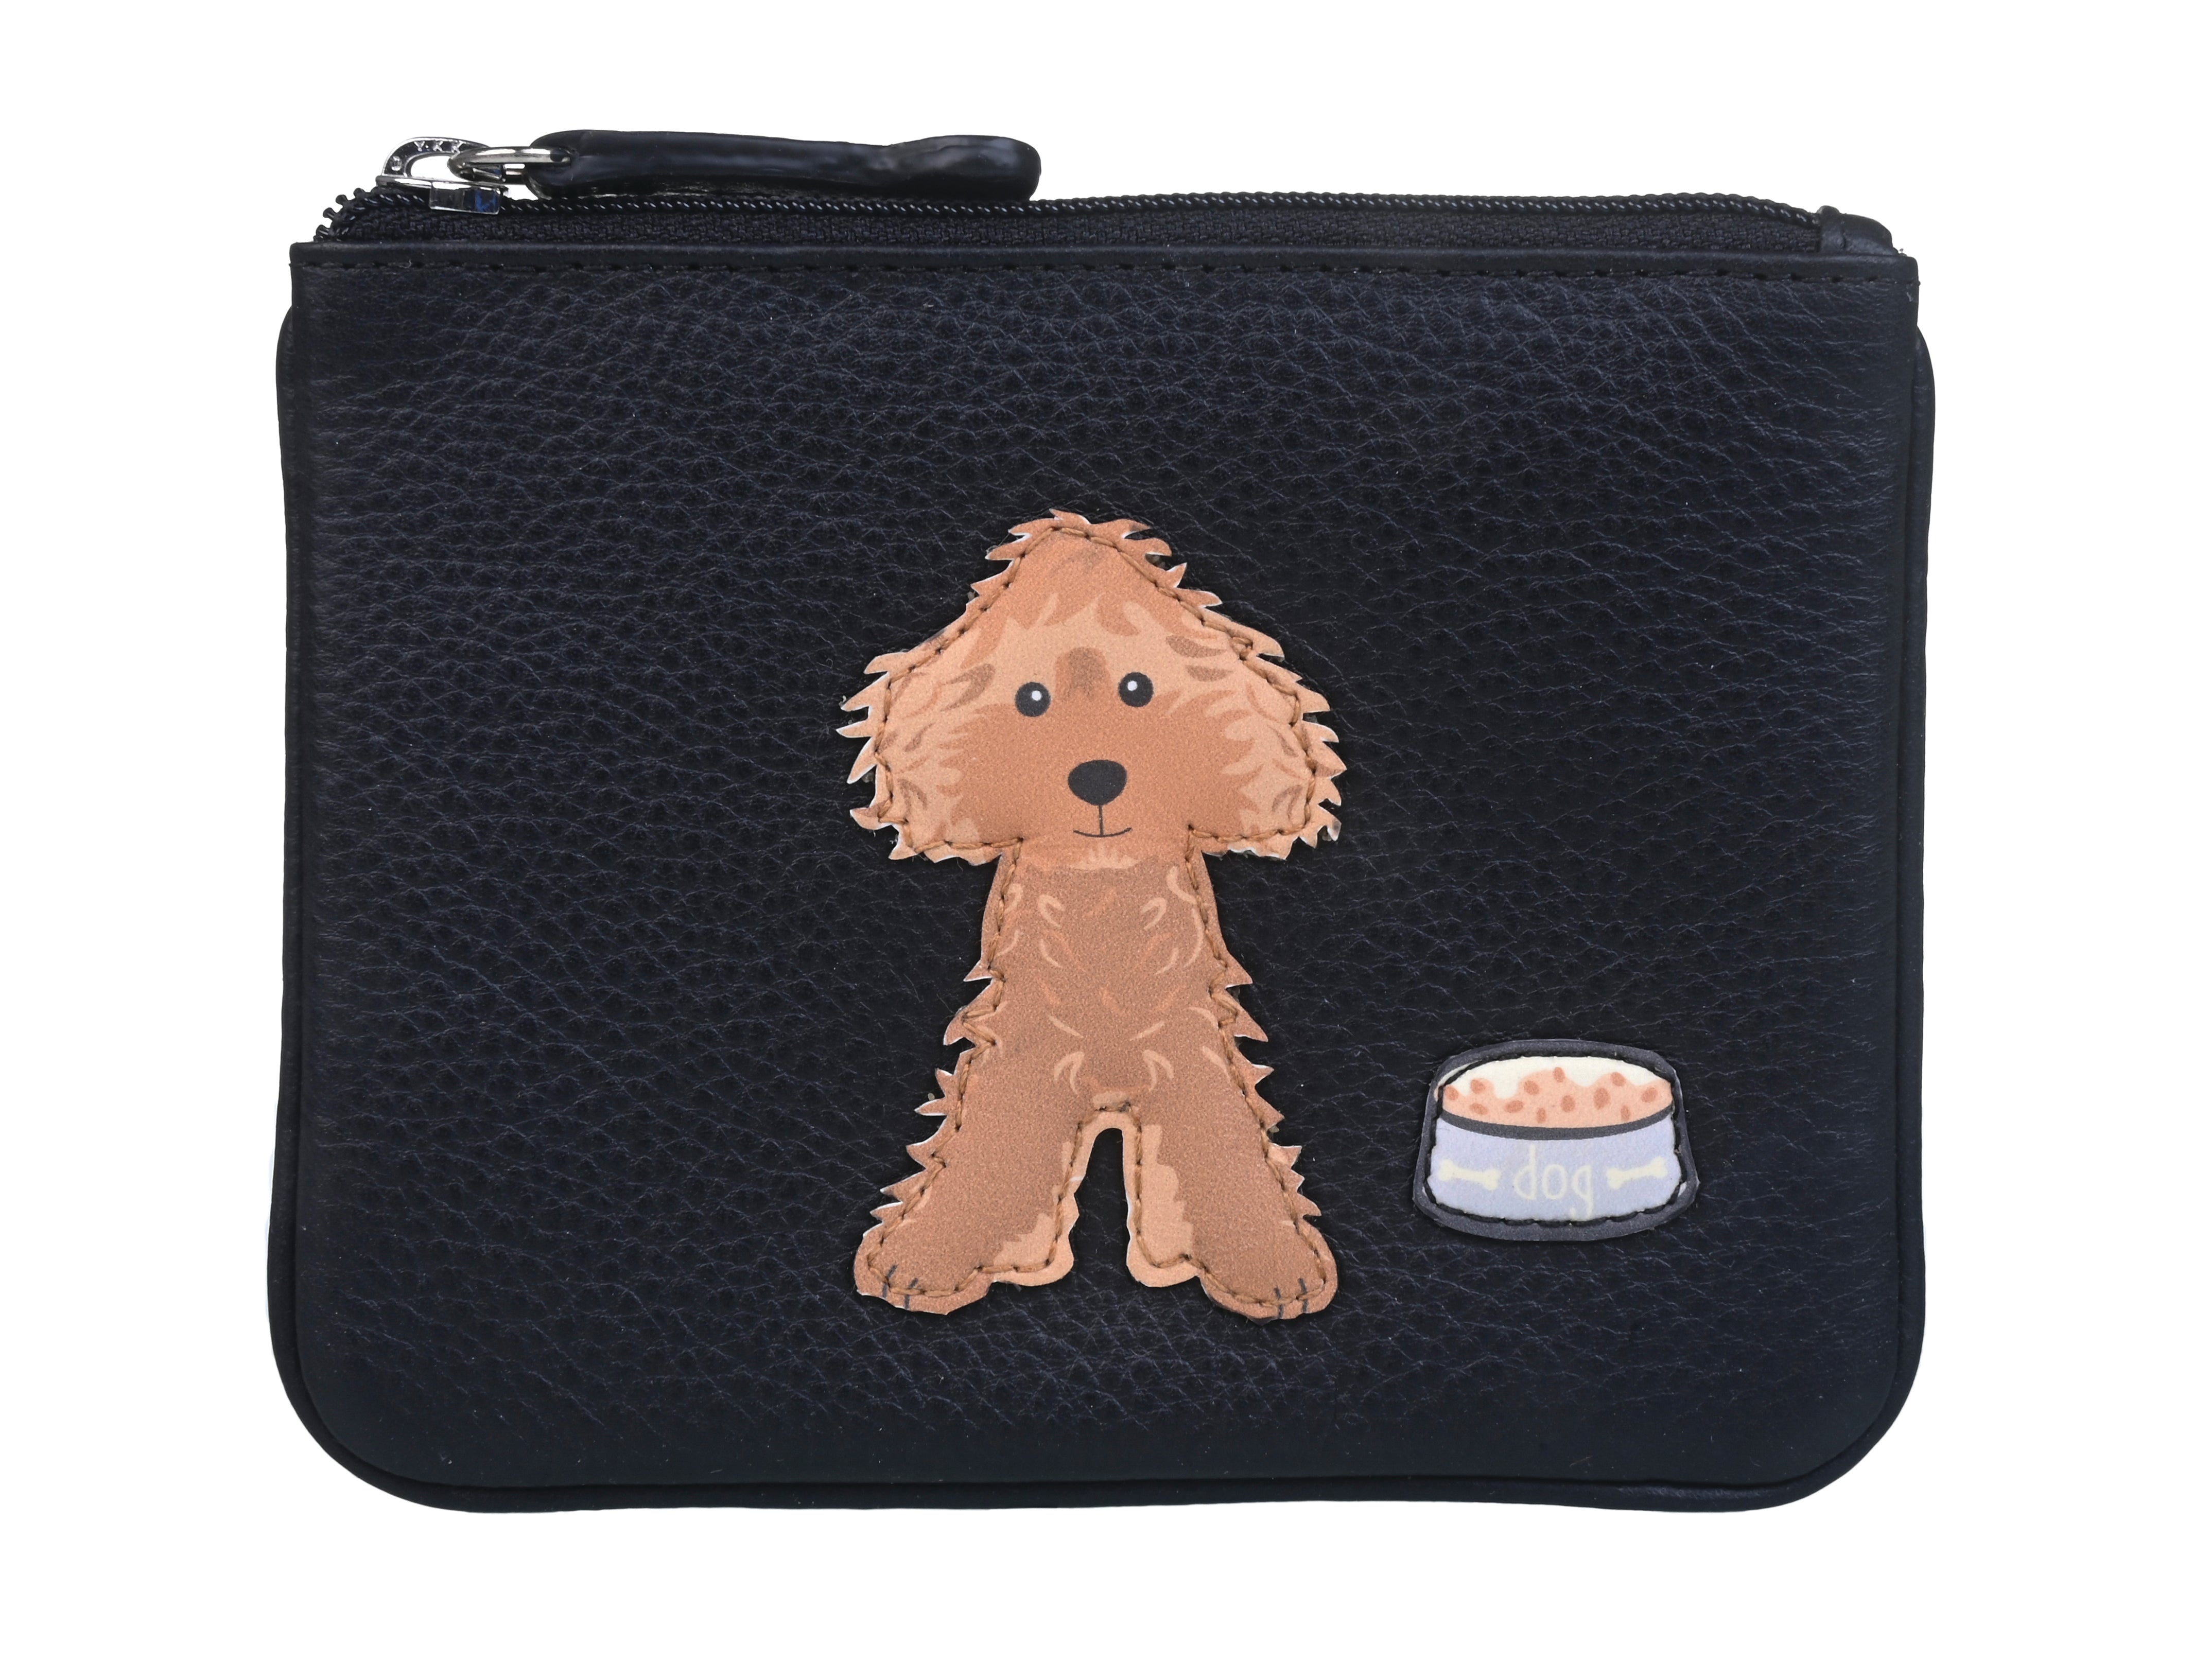 Leather Coin Purse - BF Dogs on Wall from Mala Leather